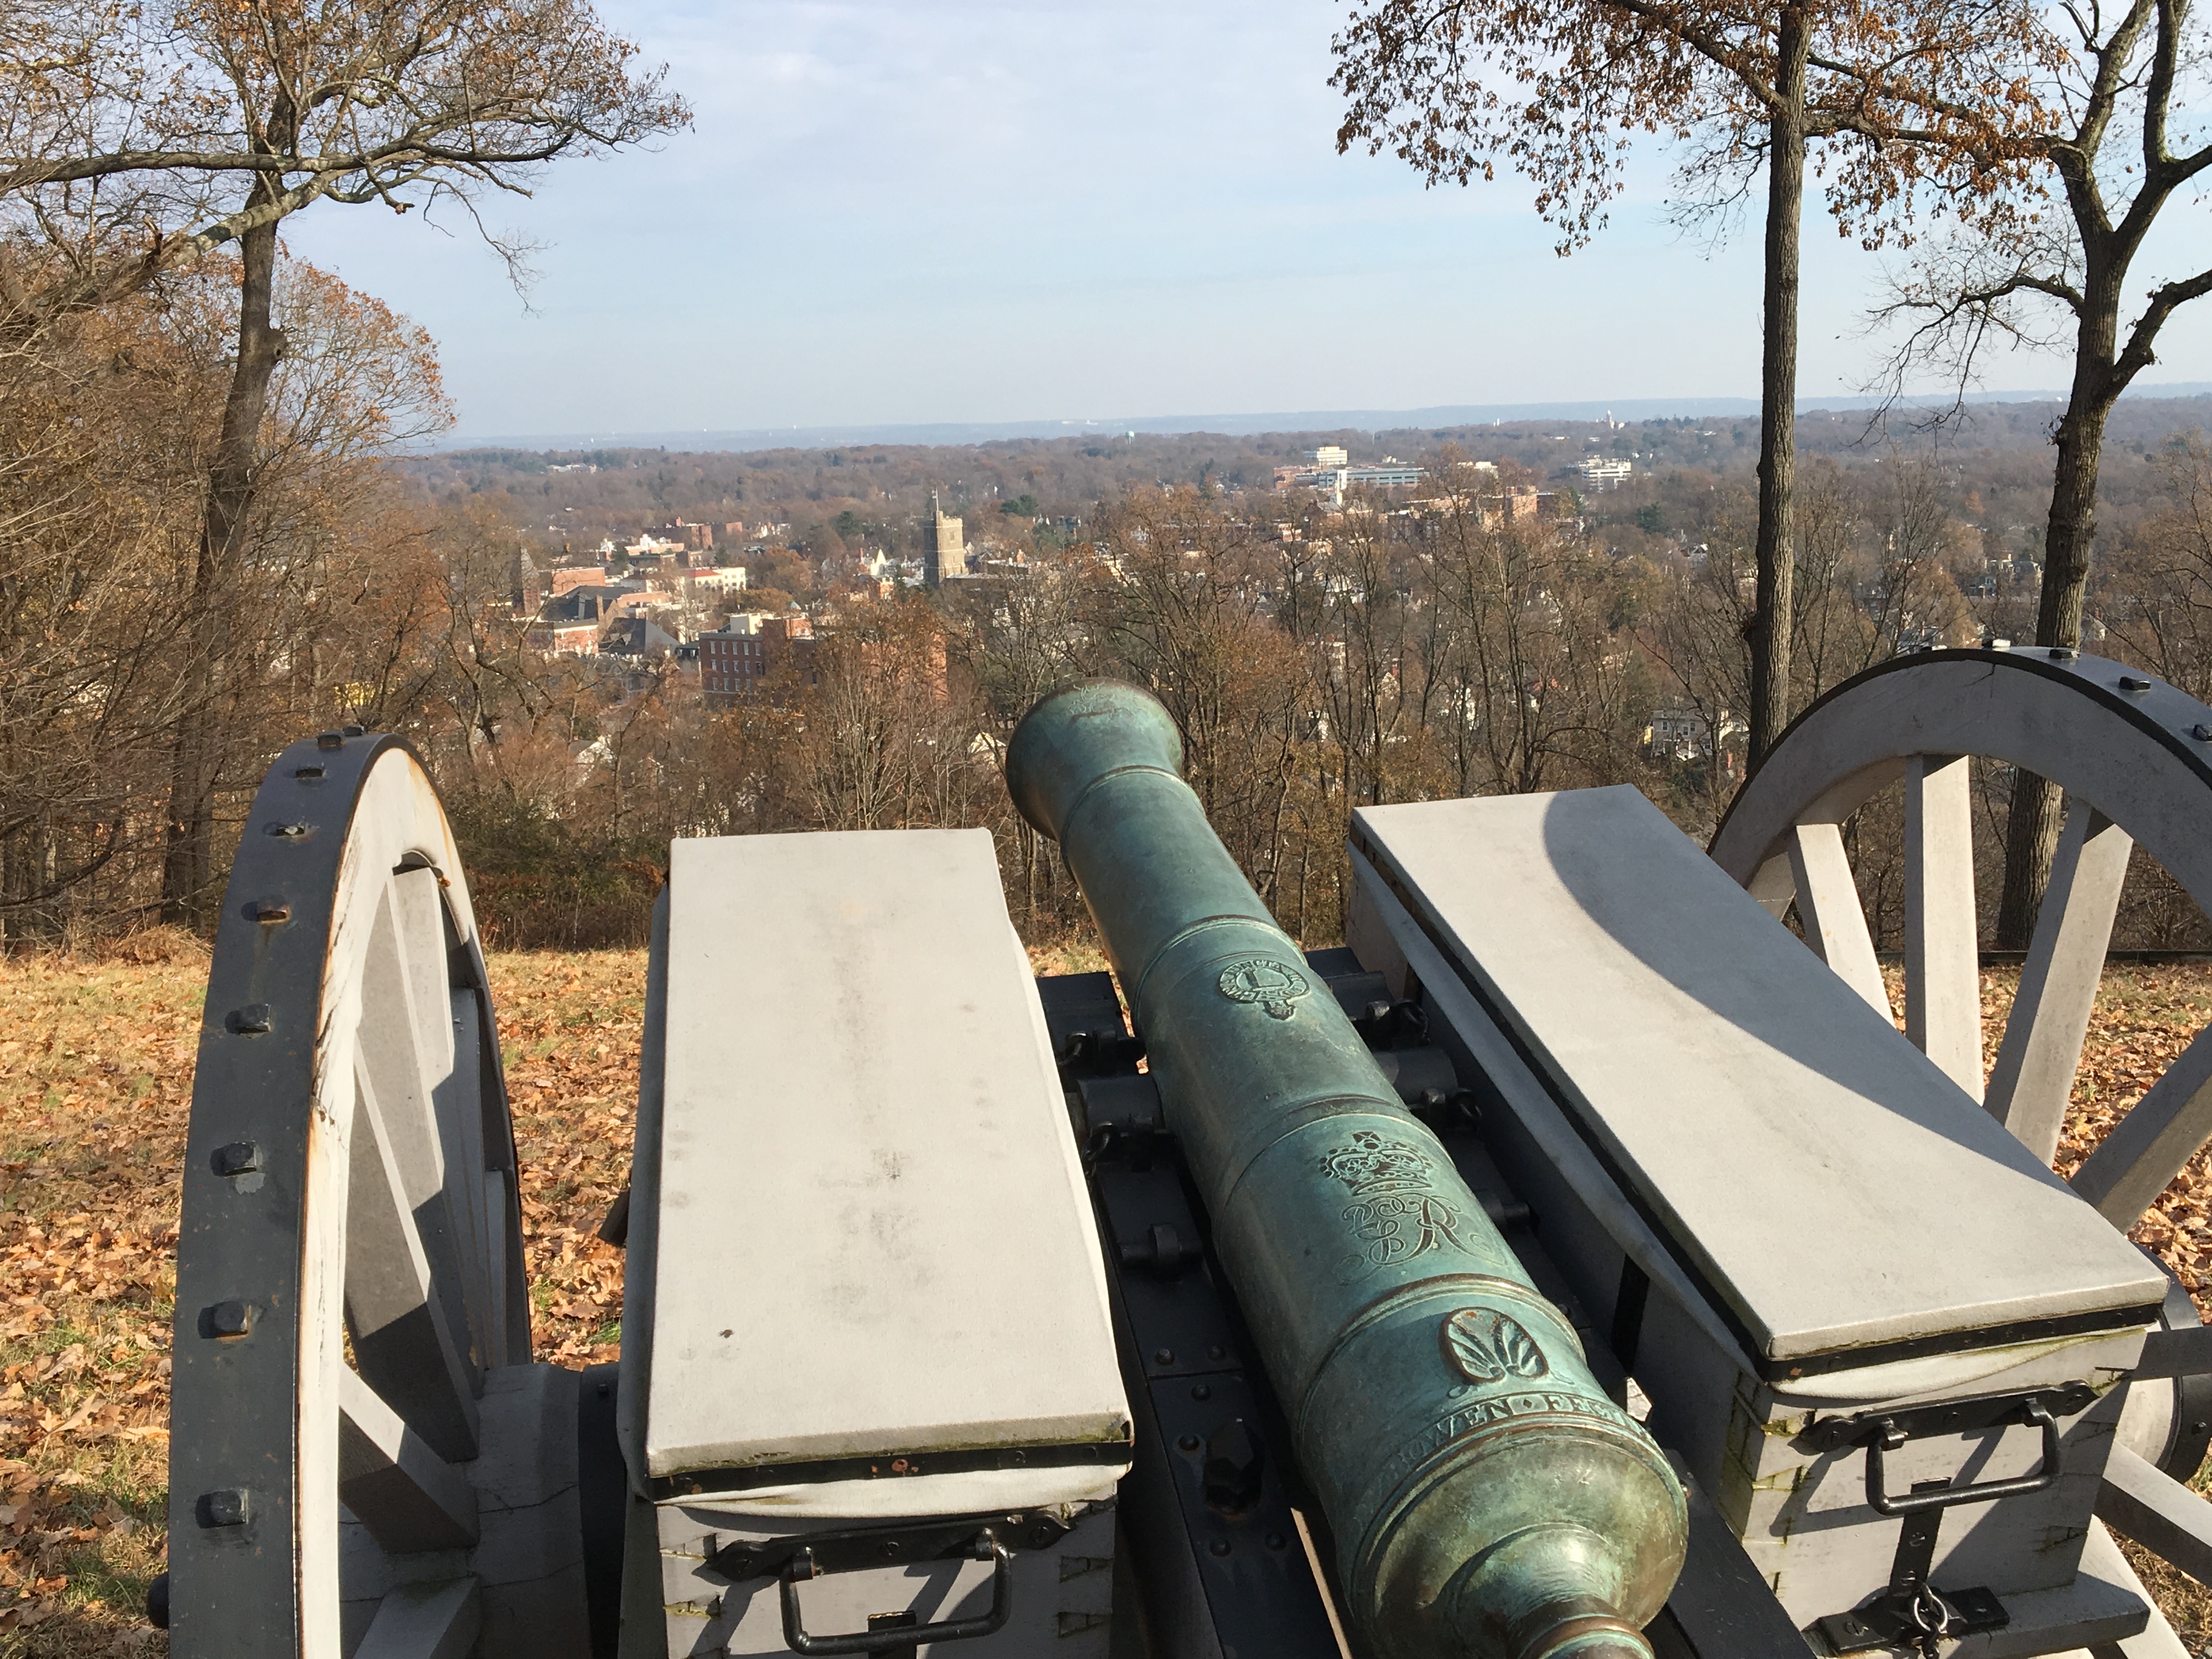 The view from Fort Nonsense with cannon pointing toward the horizon